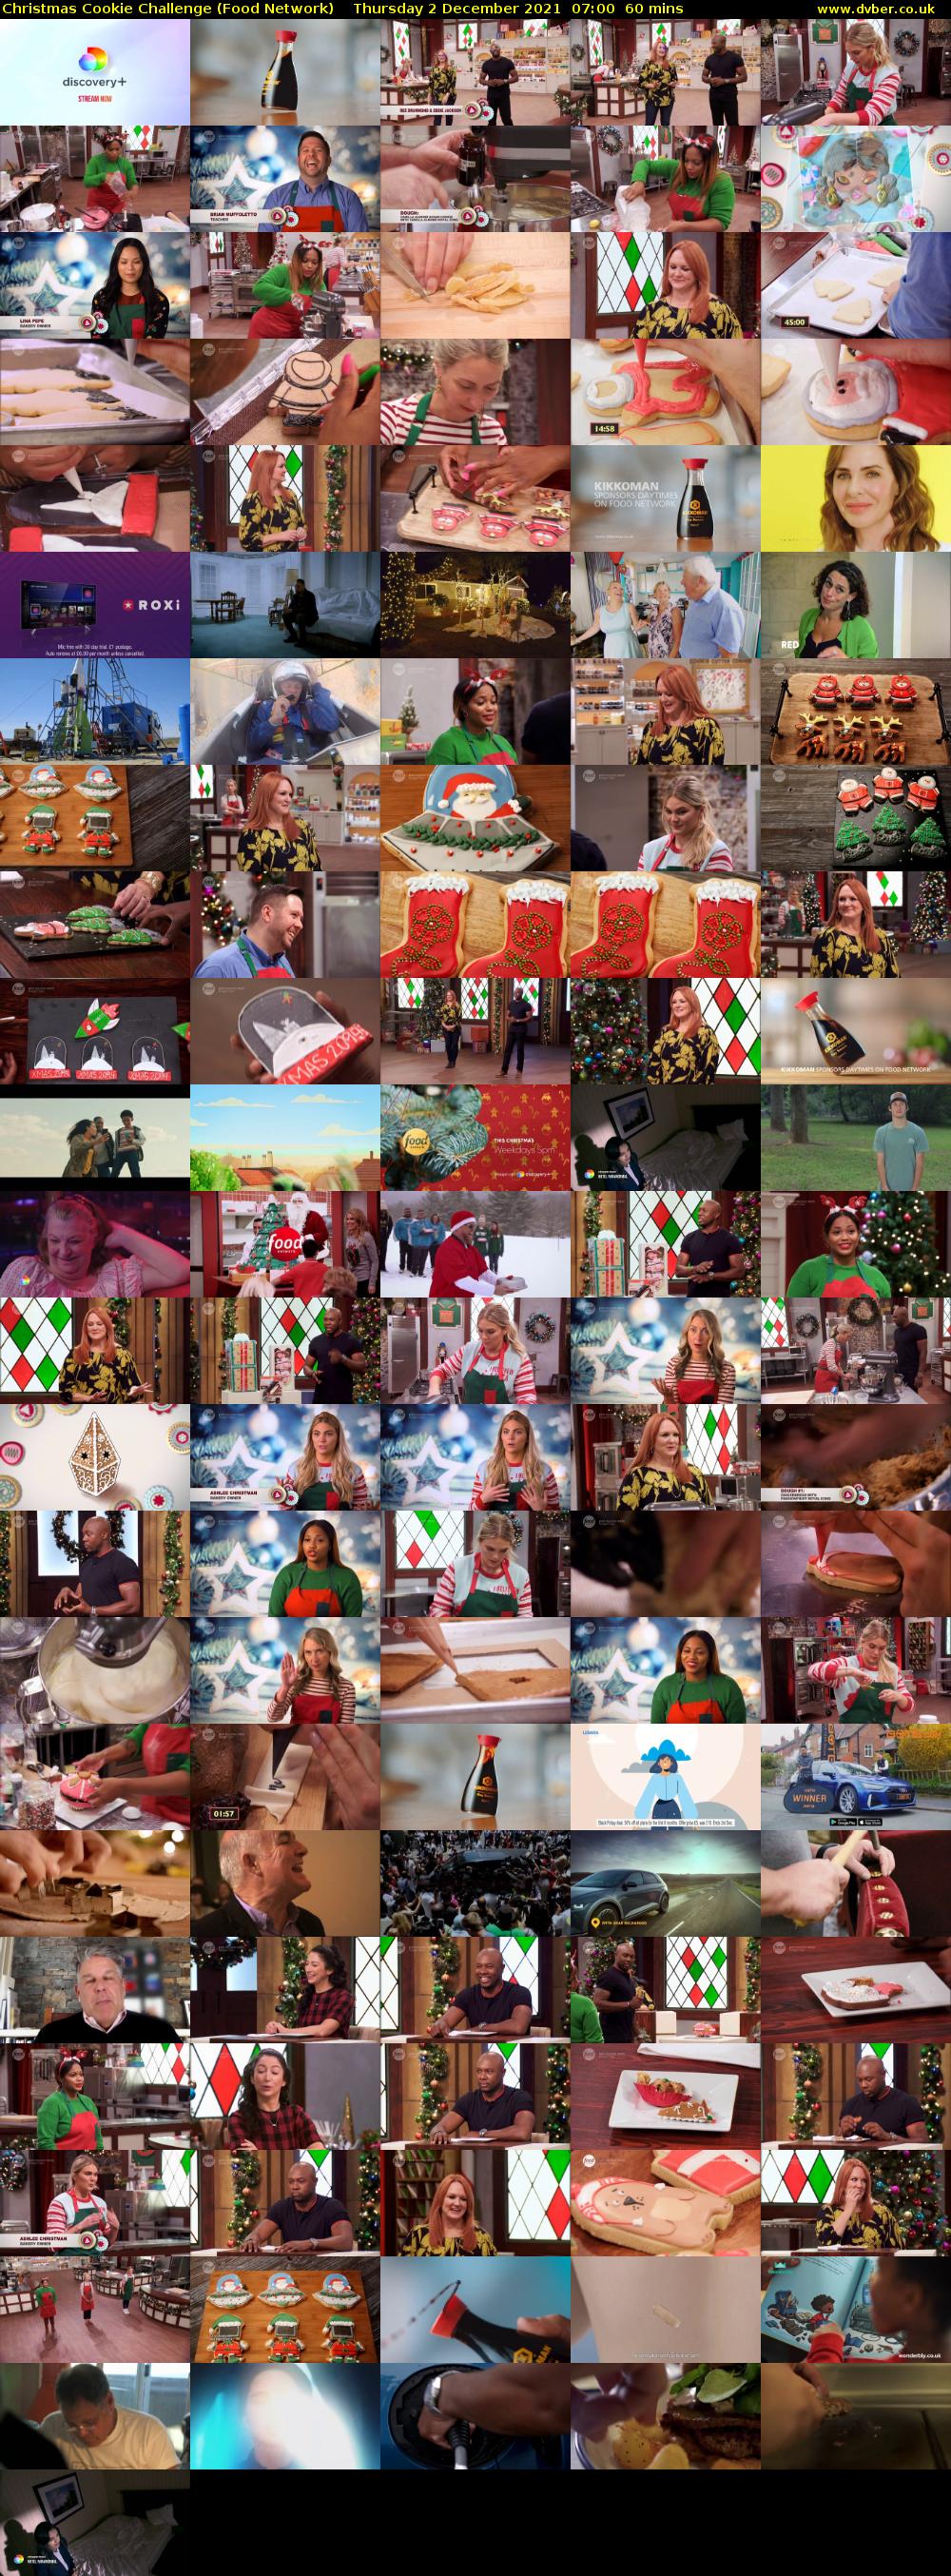 Christmas Cookie Challenge (Food Network) Thursday 2 December 2021 07:00 - 08:00